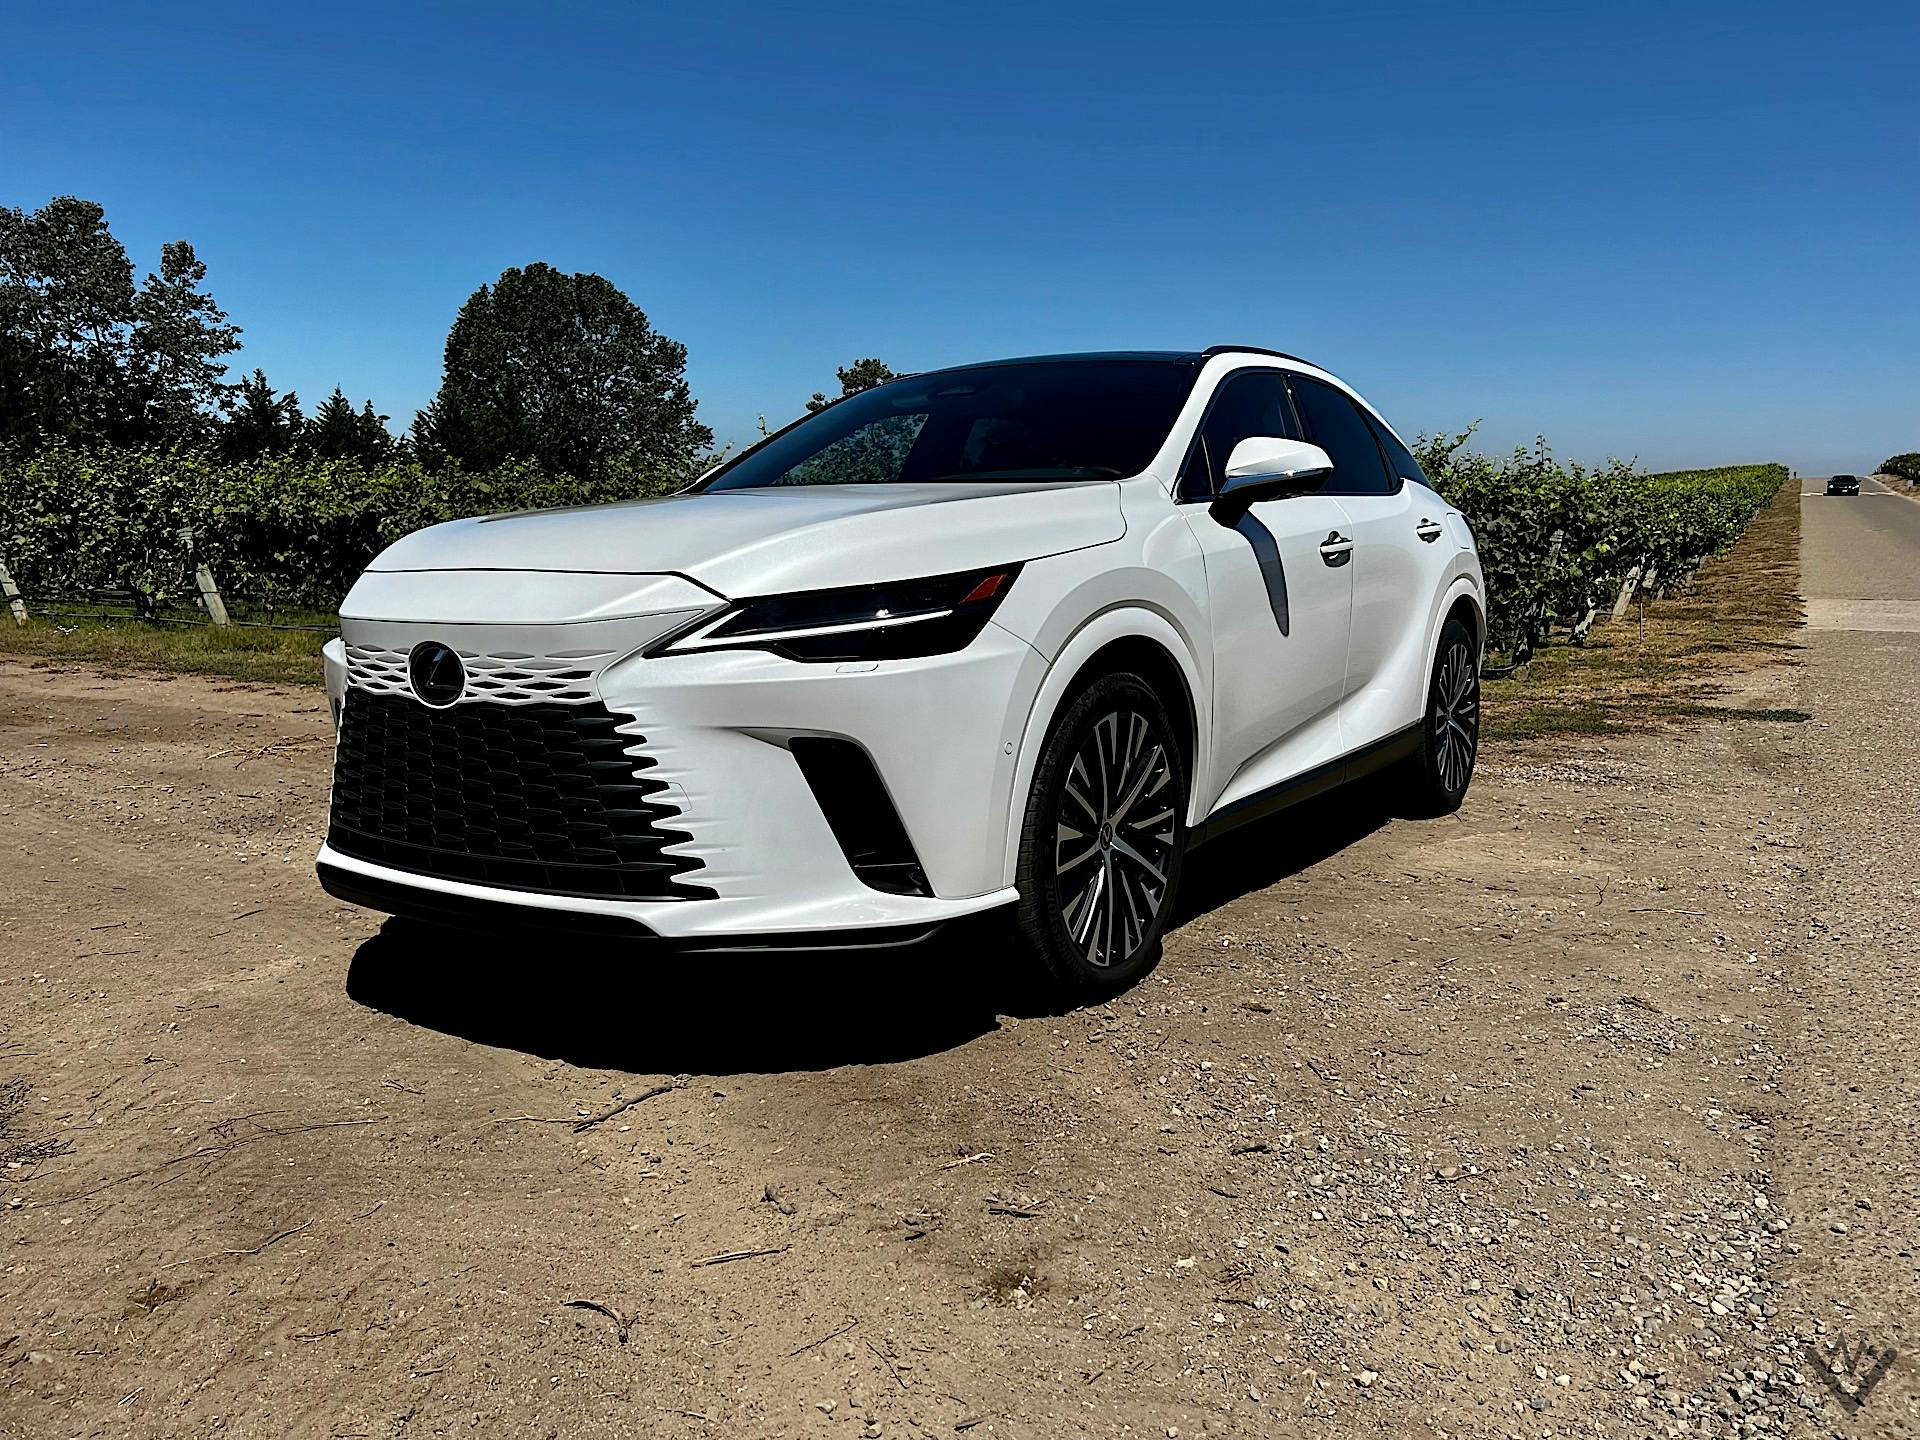 2023 Lexus RX 450h+ early first look review Upgraded plugin model tough to beat EV Pulse